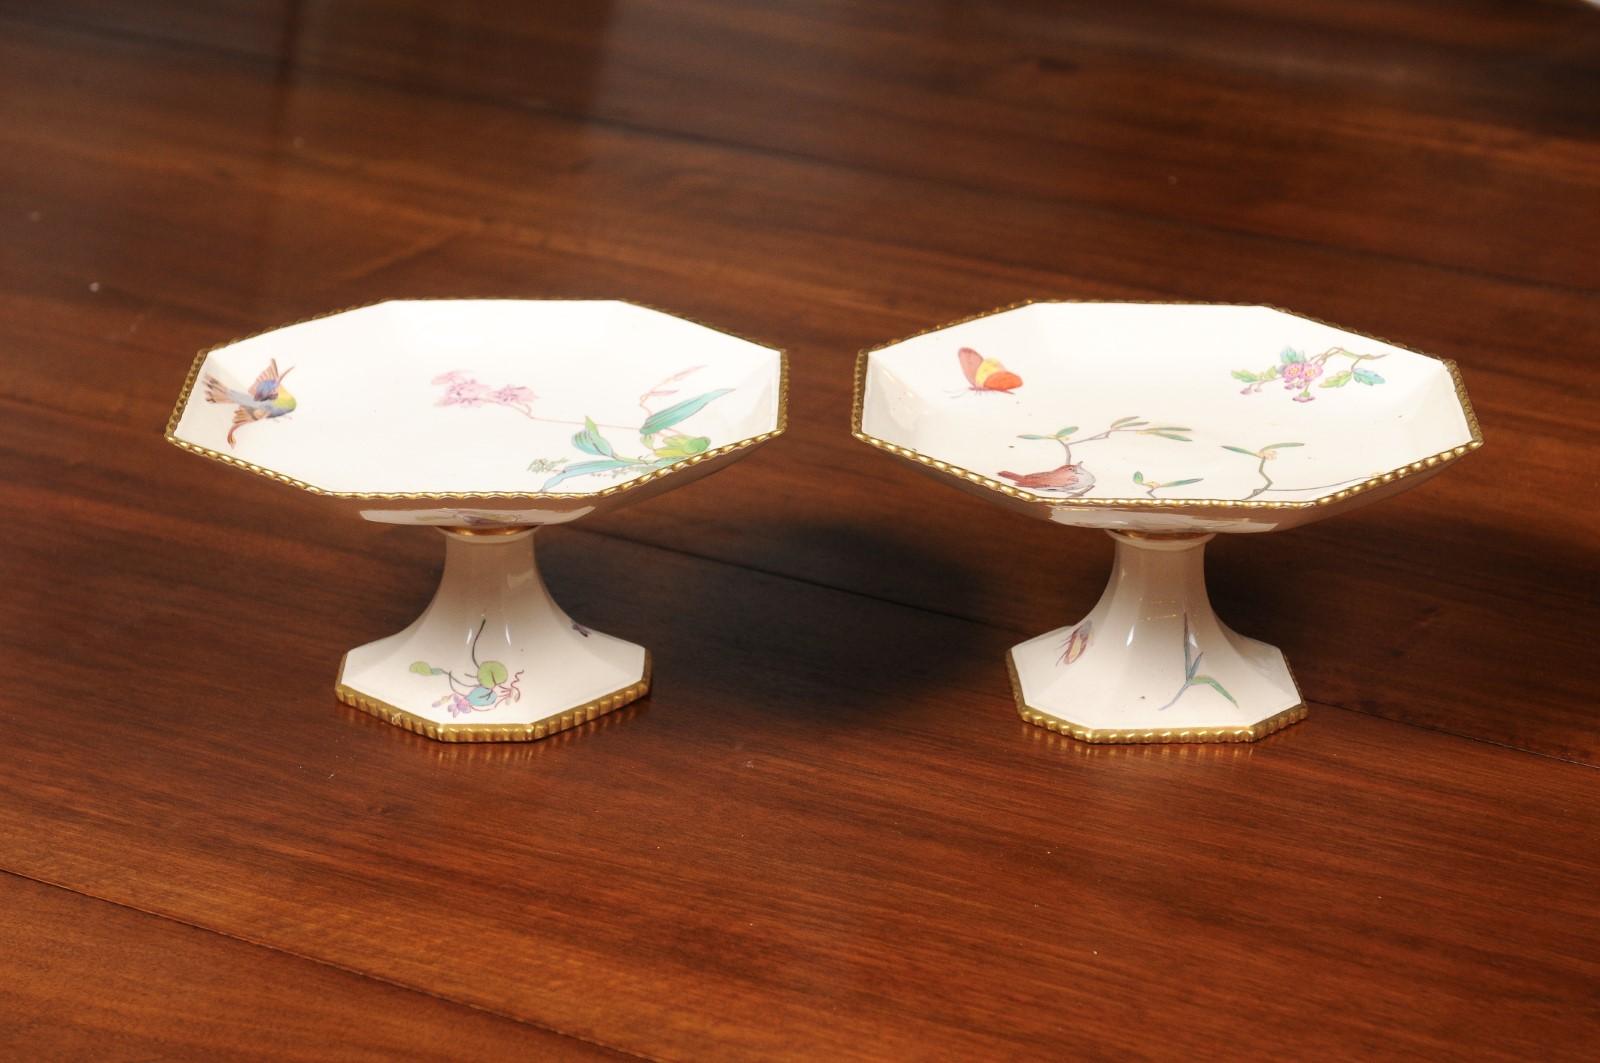 Pair of French 19th Century Porcelain Compotes with Painted Birds and Flowers In Good Condition For Sale In Atlanta, GA